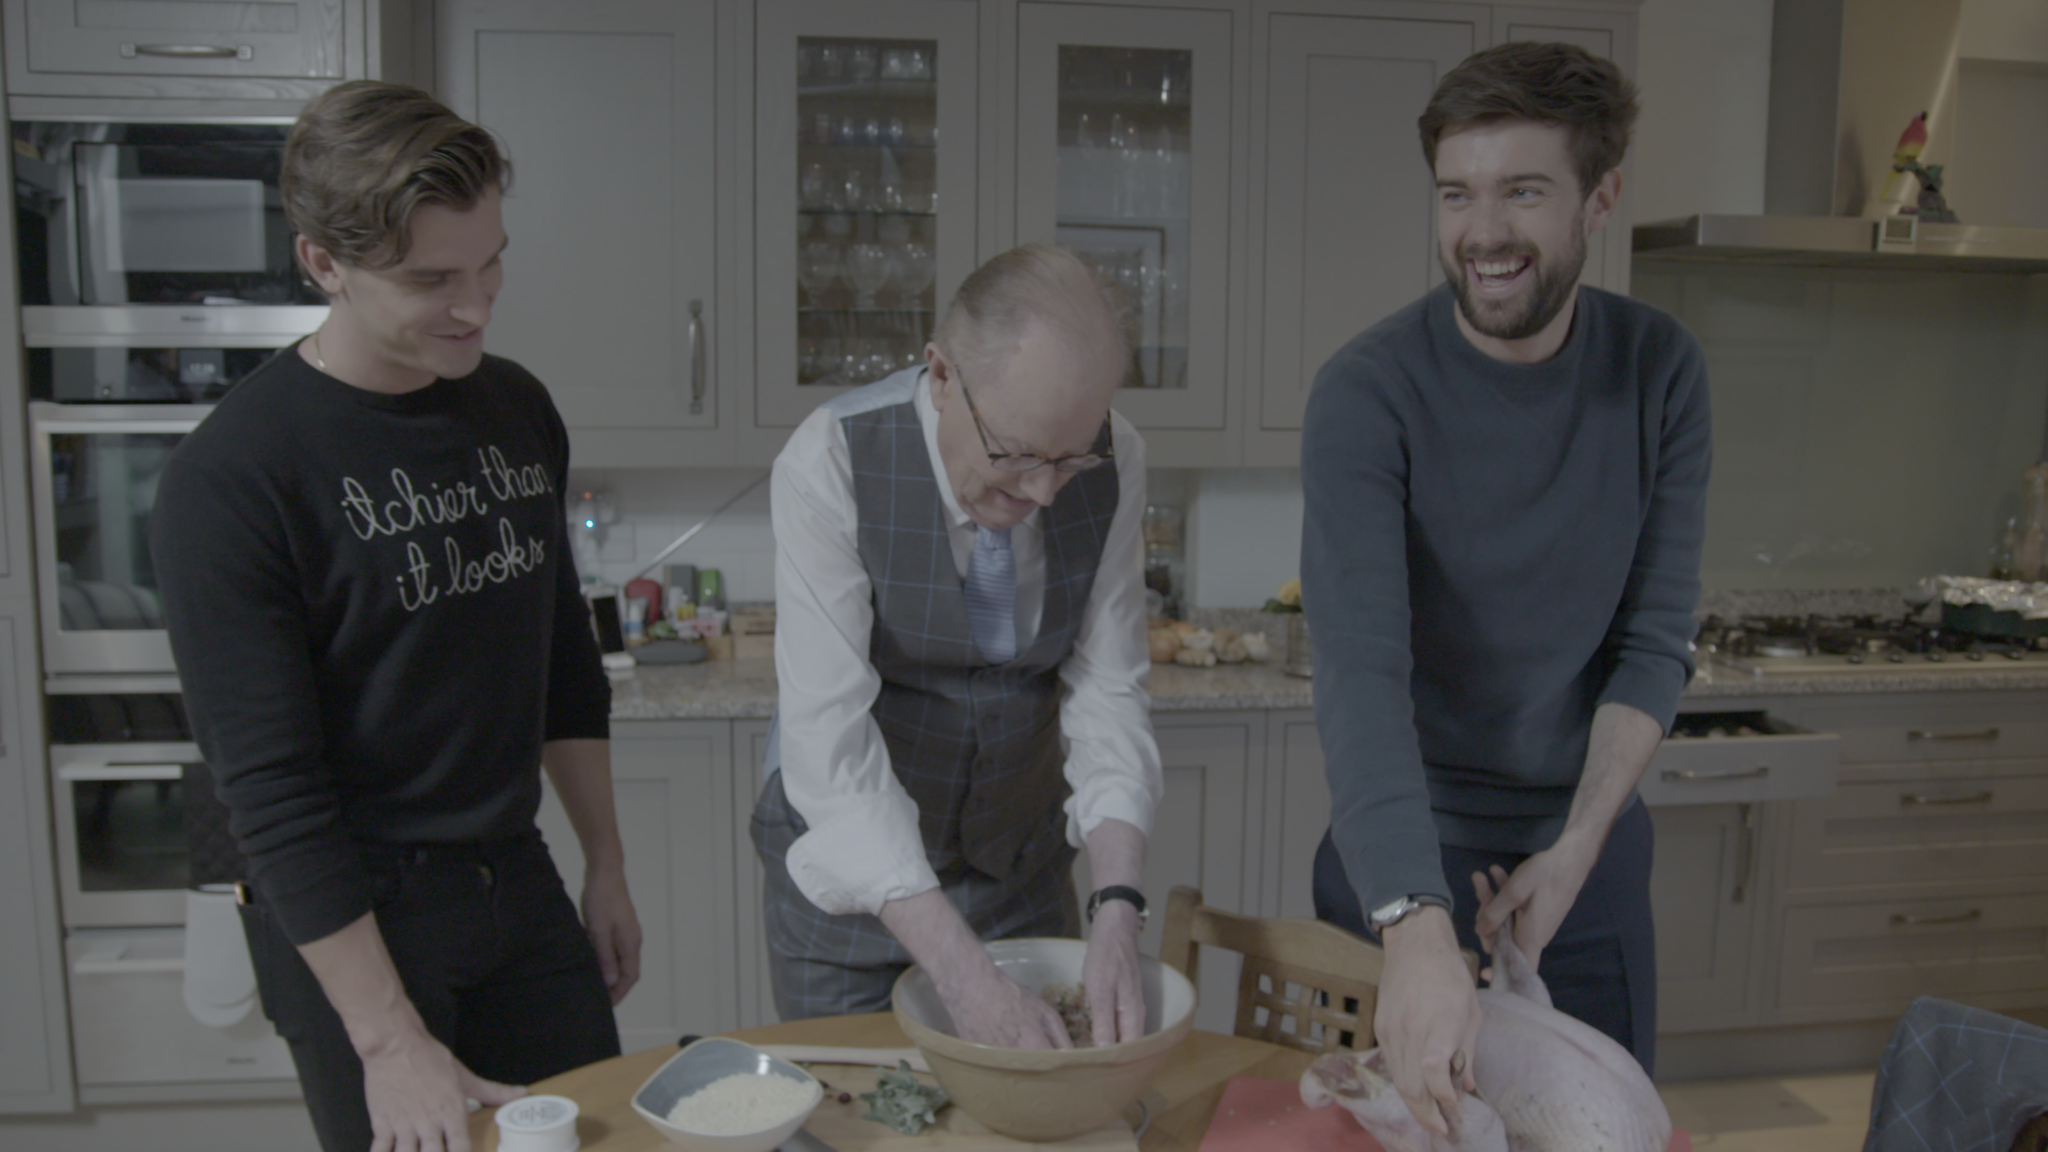 https://media.radiocms.net/uploads/2019/11/21132225/Jack_Whitehall__Christmas_With_My_Father_00_27_30_18.png